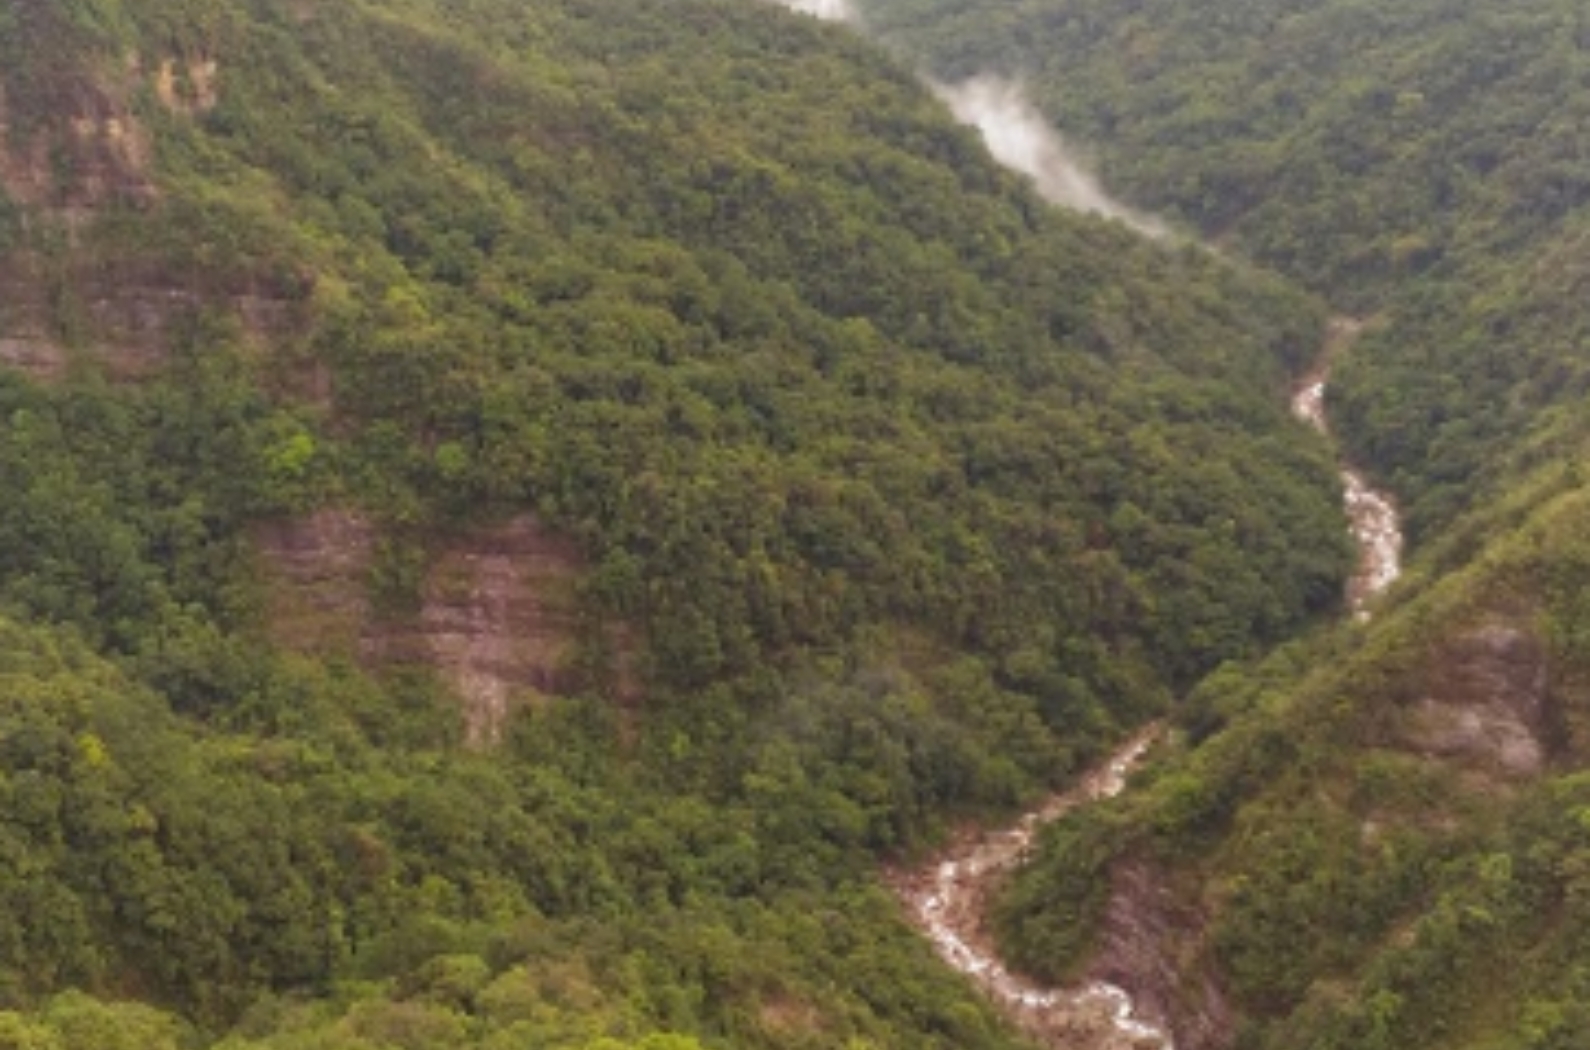 The species and its habitat are unique. It occurs in an isolated population in the state of Meghalaya.